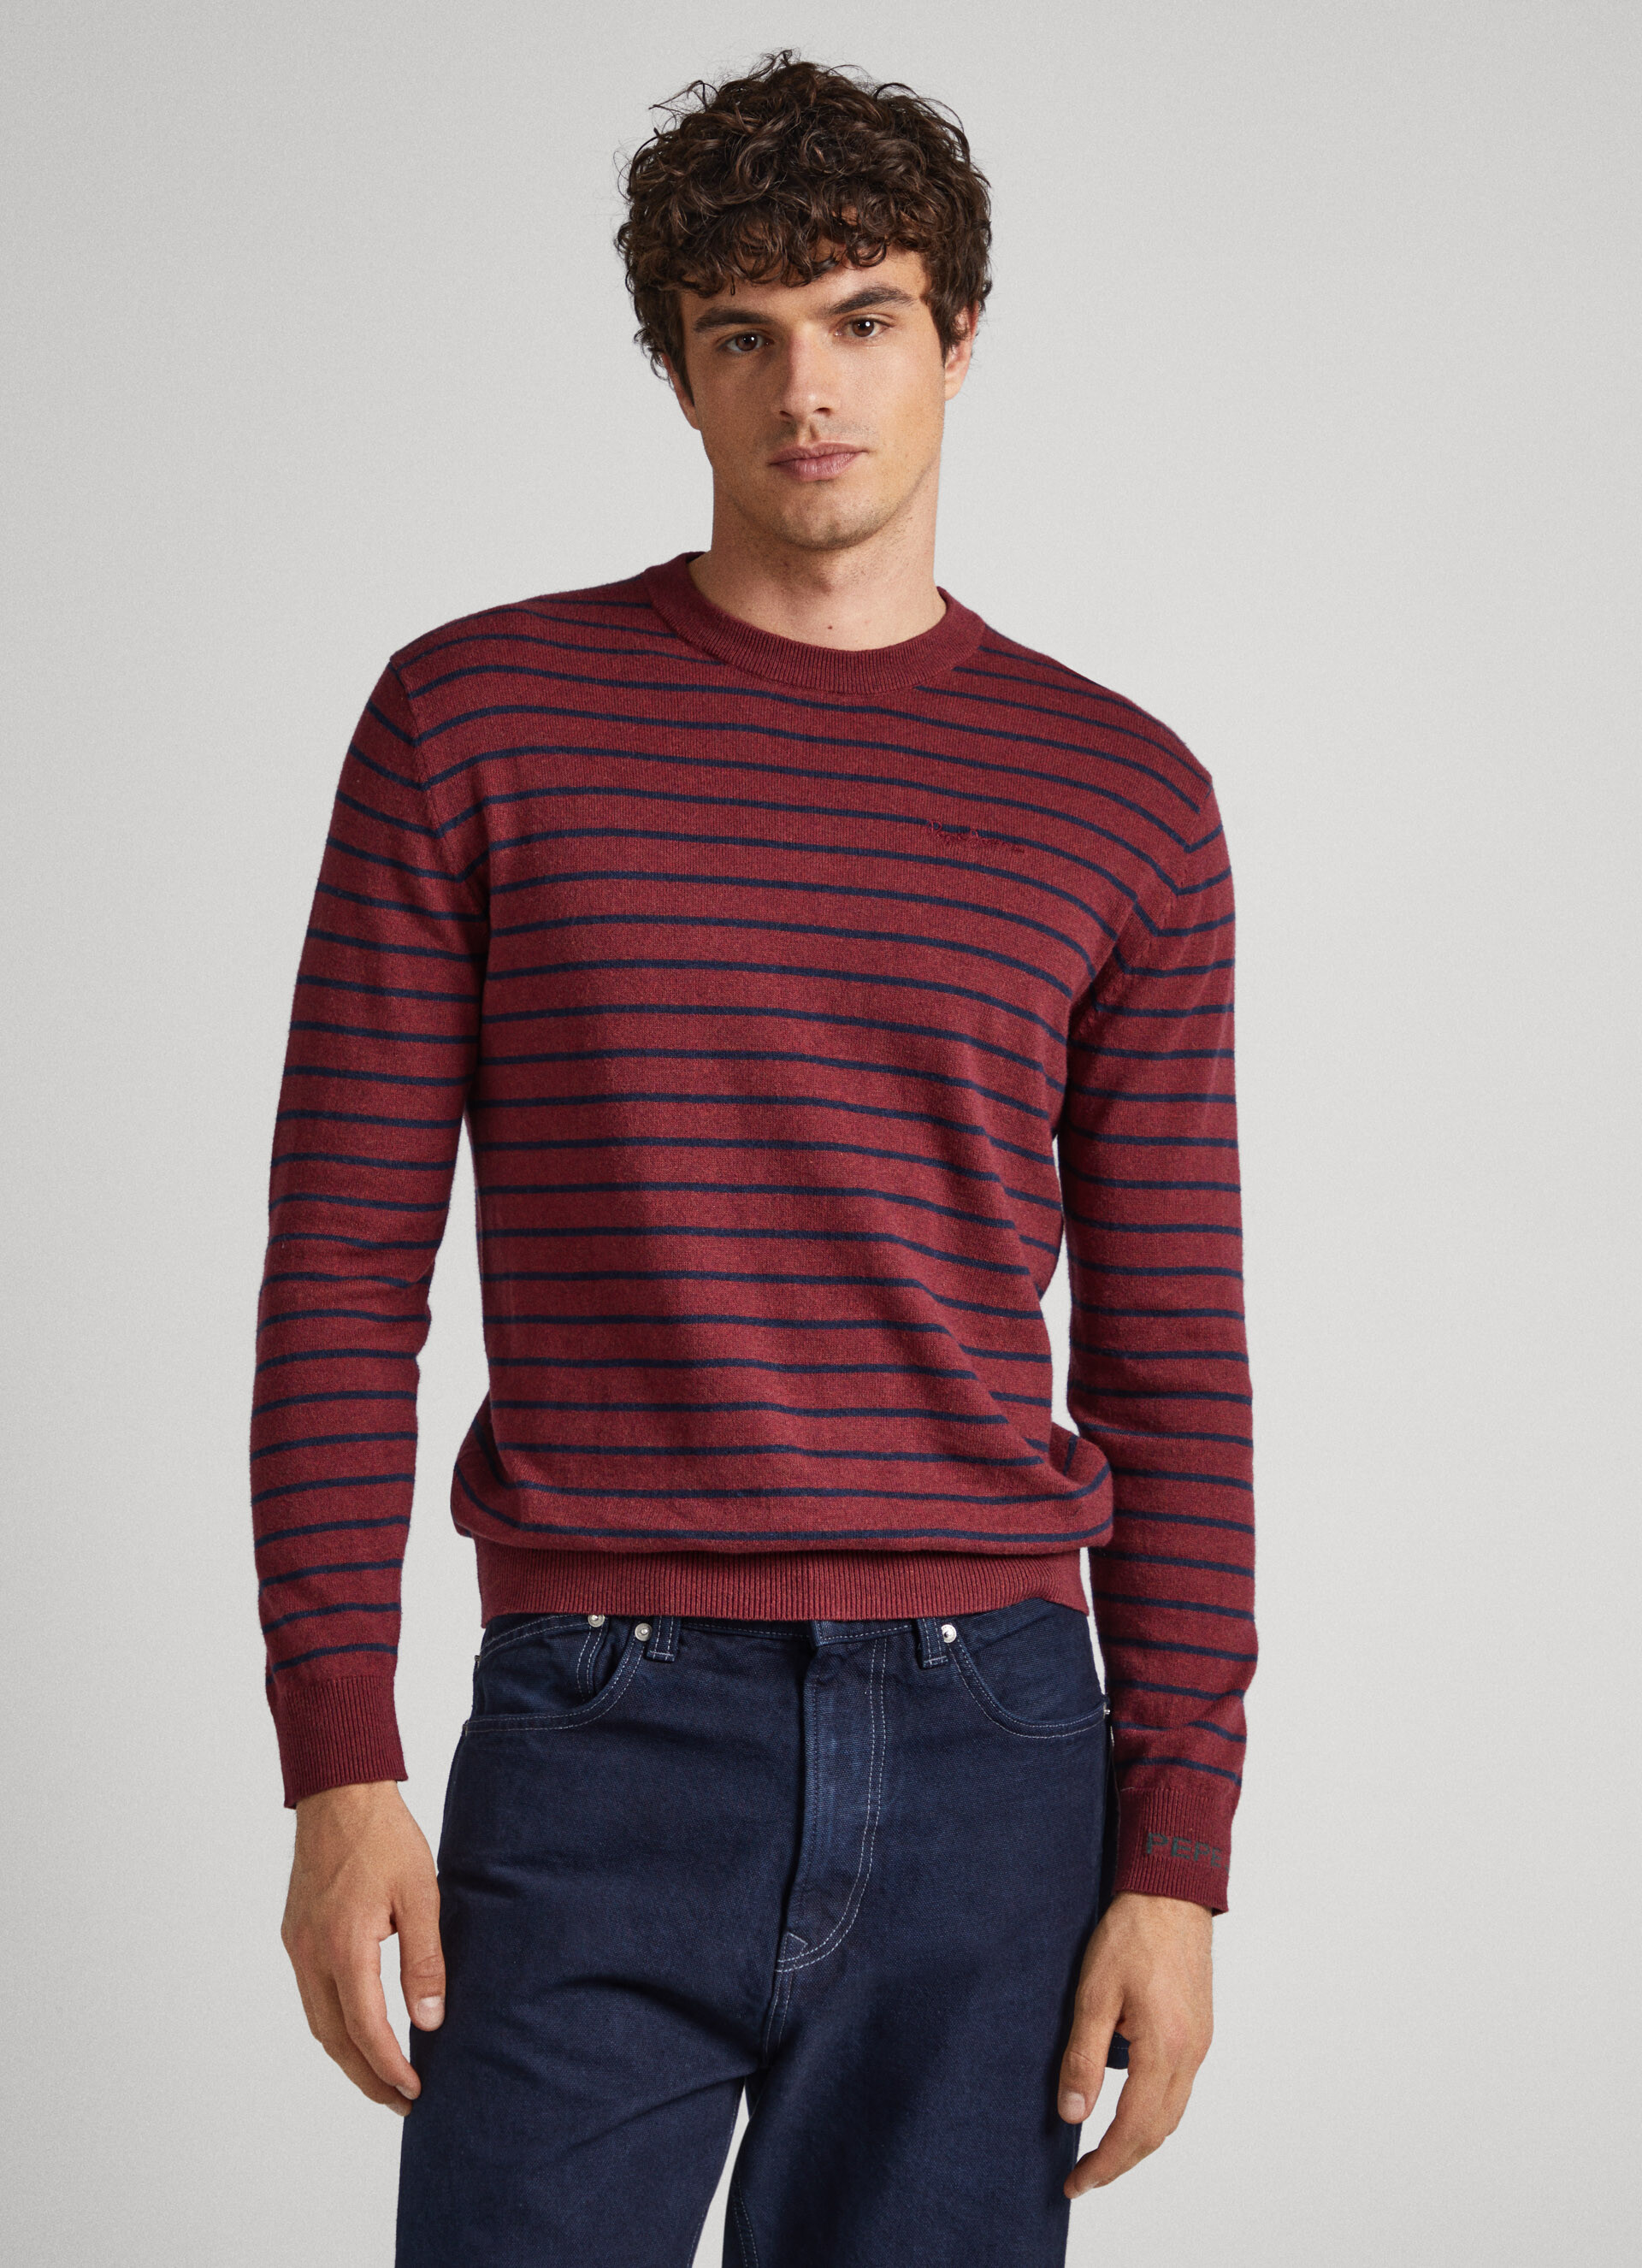 ANDRE STRIPES STRIPED PRINT JUMPER | PEPEJEANS